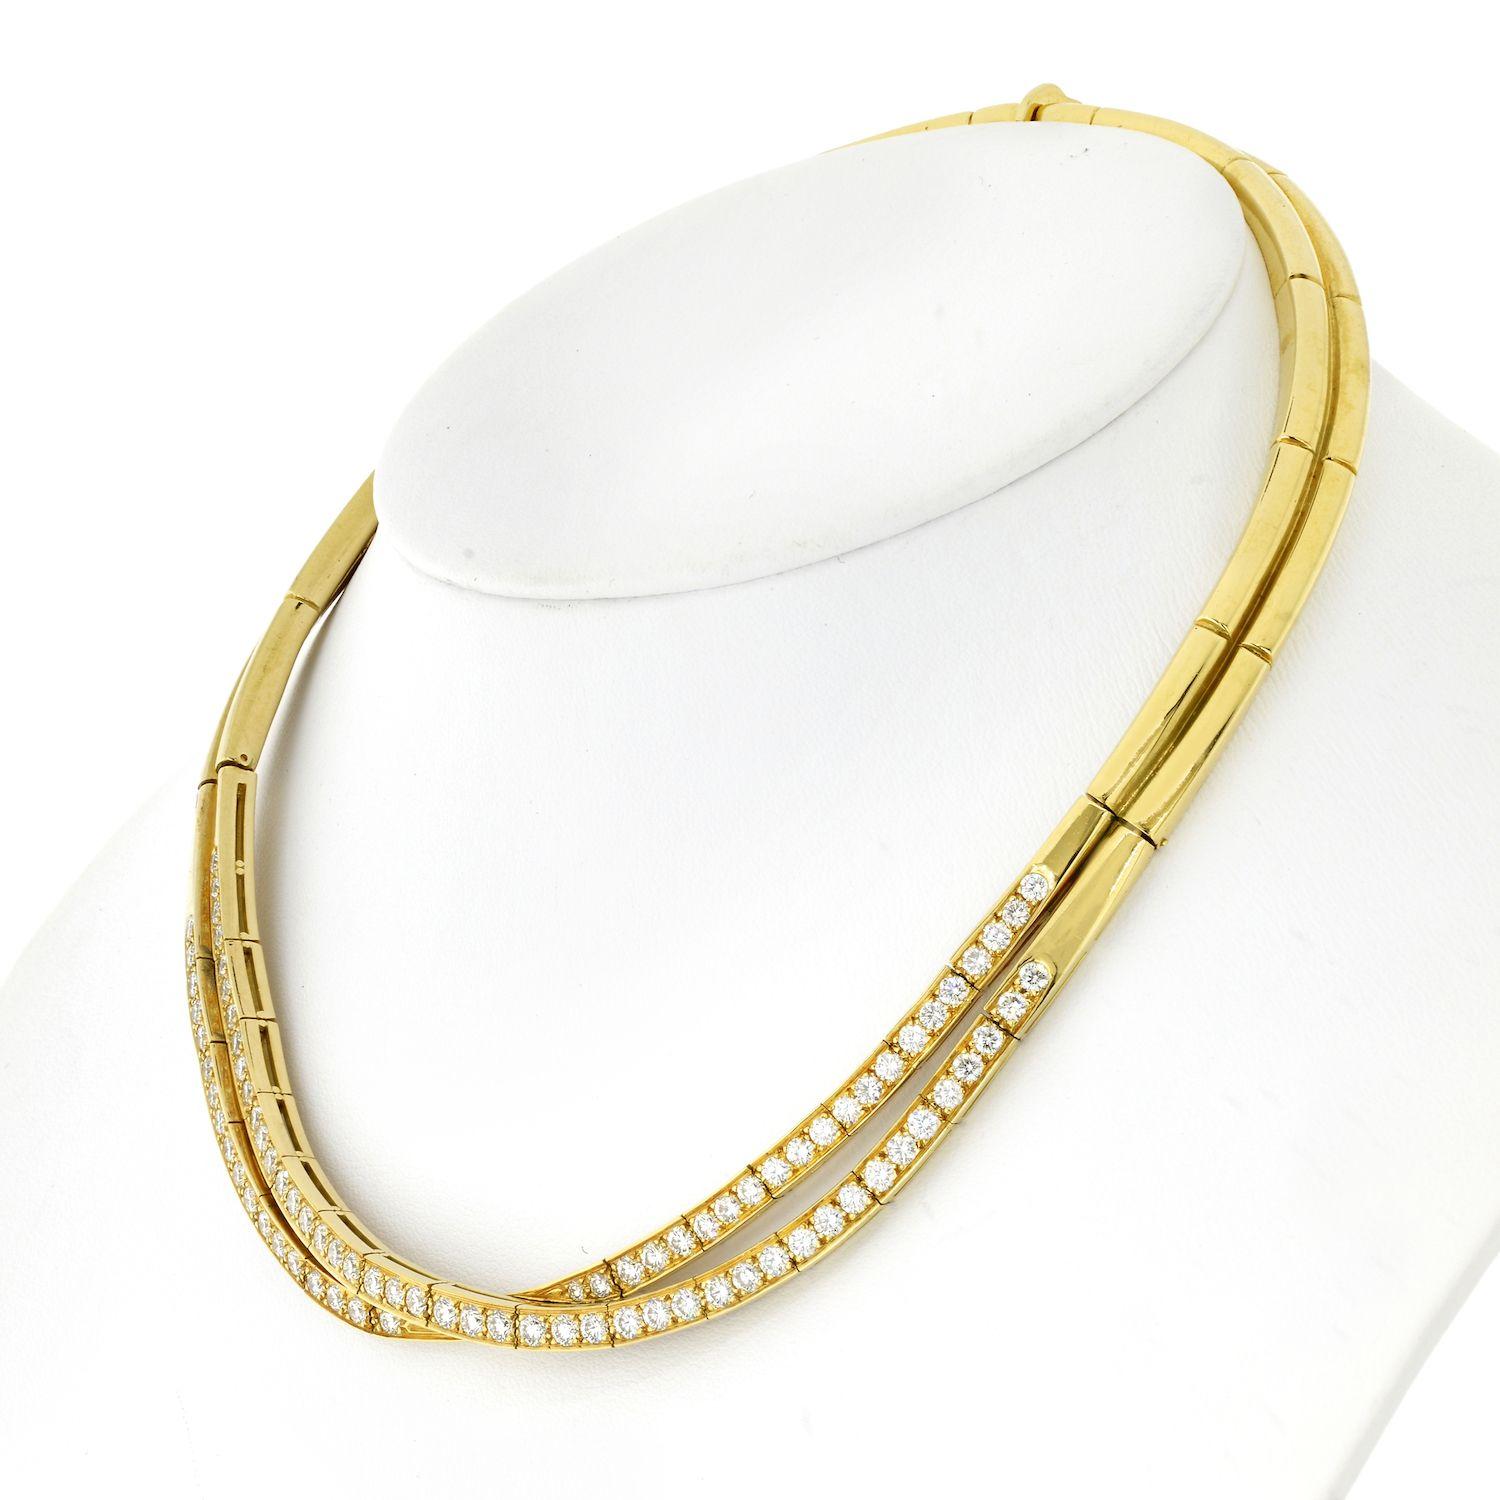 Incorporate this vintage jewel into your day-to-day style and use it as a statement piece that reveals your bold character. This Van czleef & Arpels 18K Yellow Gold 6.00 ct diamond chocker necklace is a close-fitting necklace designed with a split